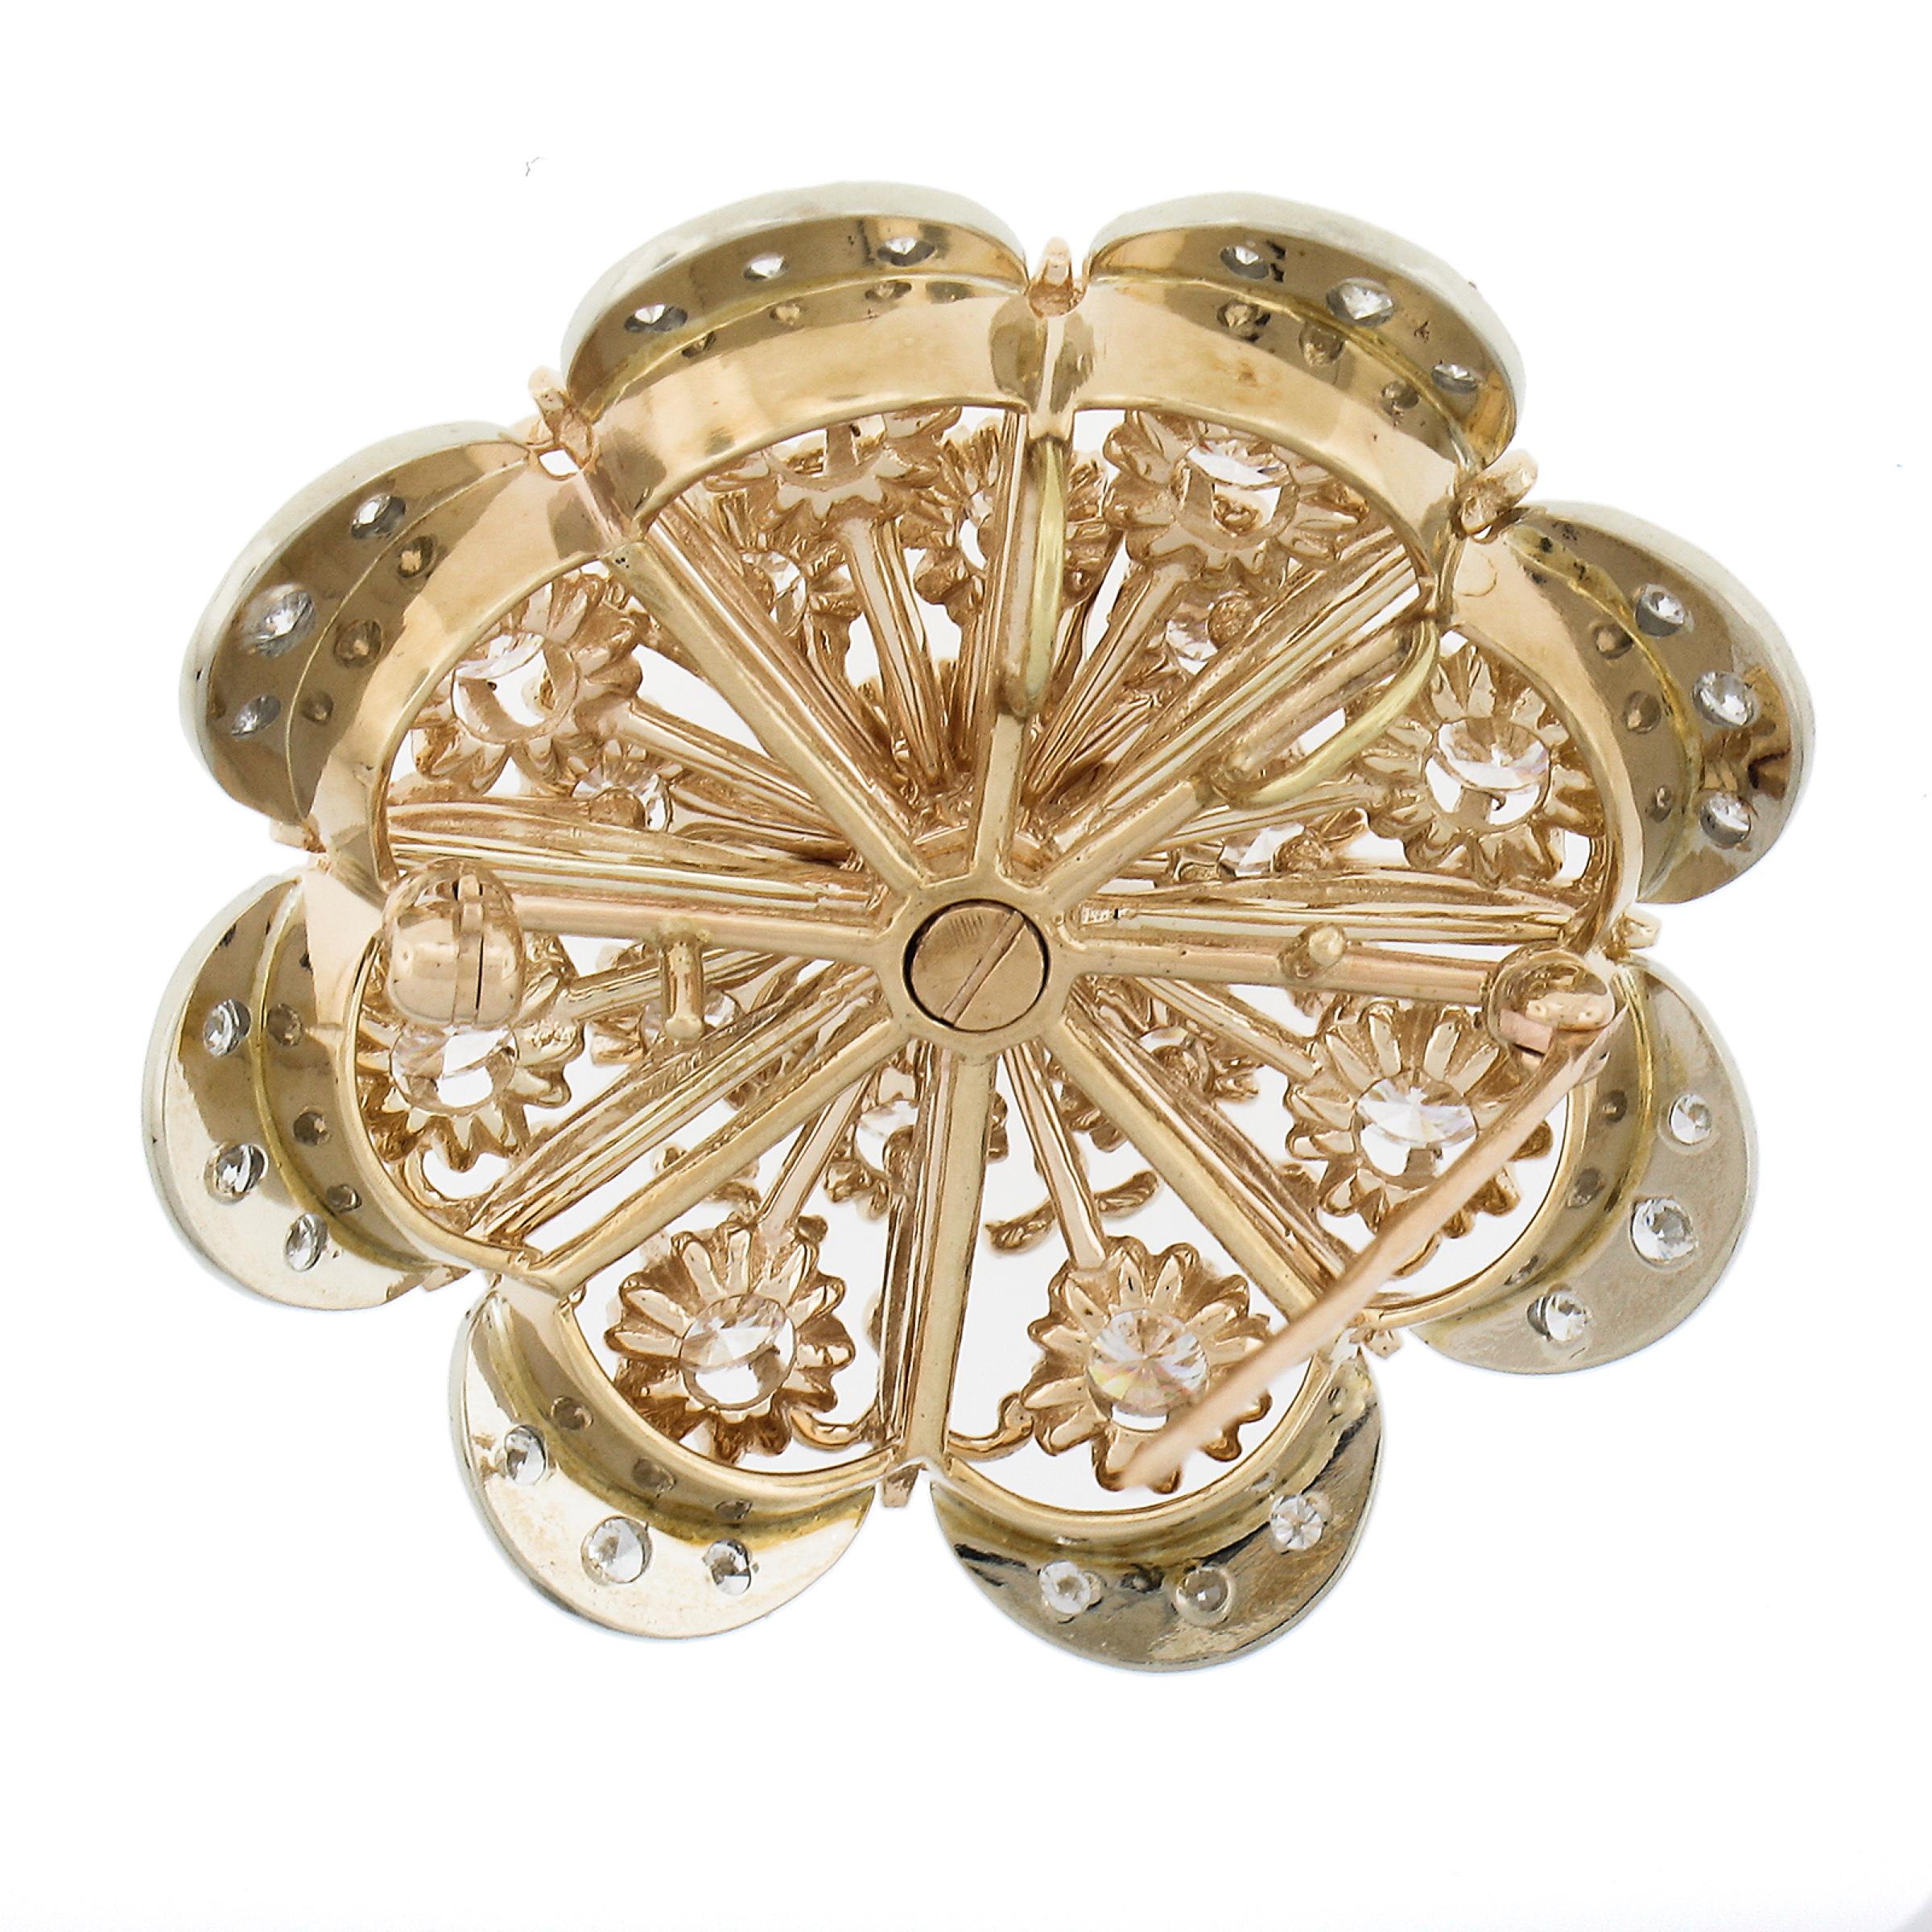 Vintage 14k Yellow Gold 3.45ct Round Buttercup Diamond Flower Pin Brooch Pendant In Excellent Condition For Sale In Montclair, NJ